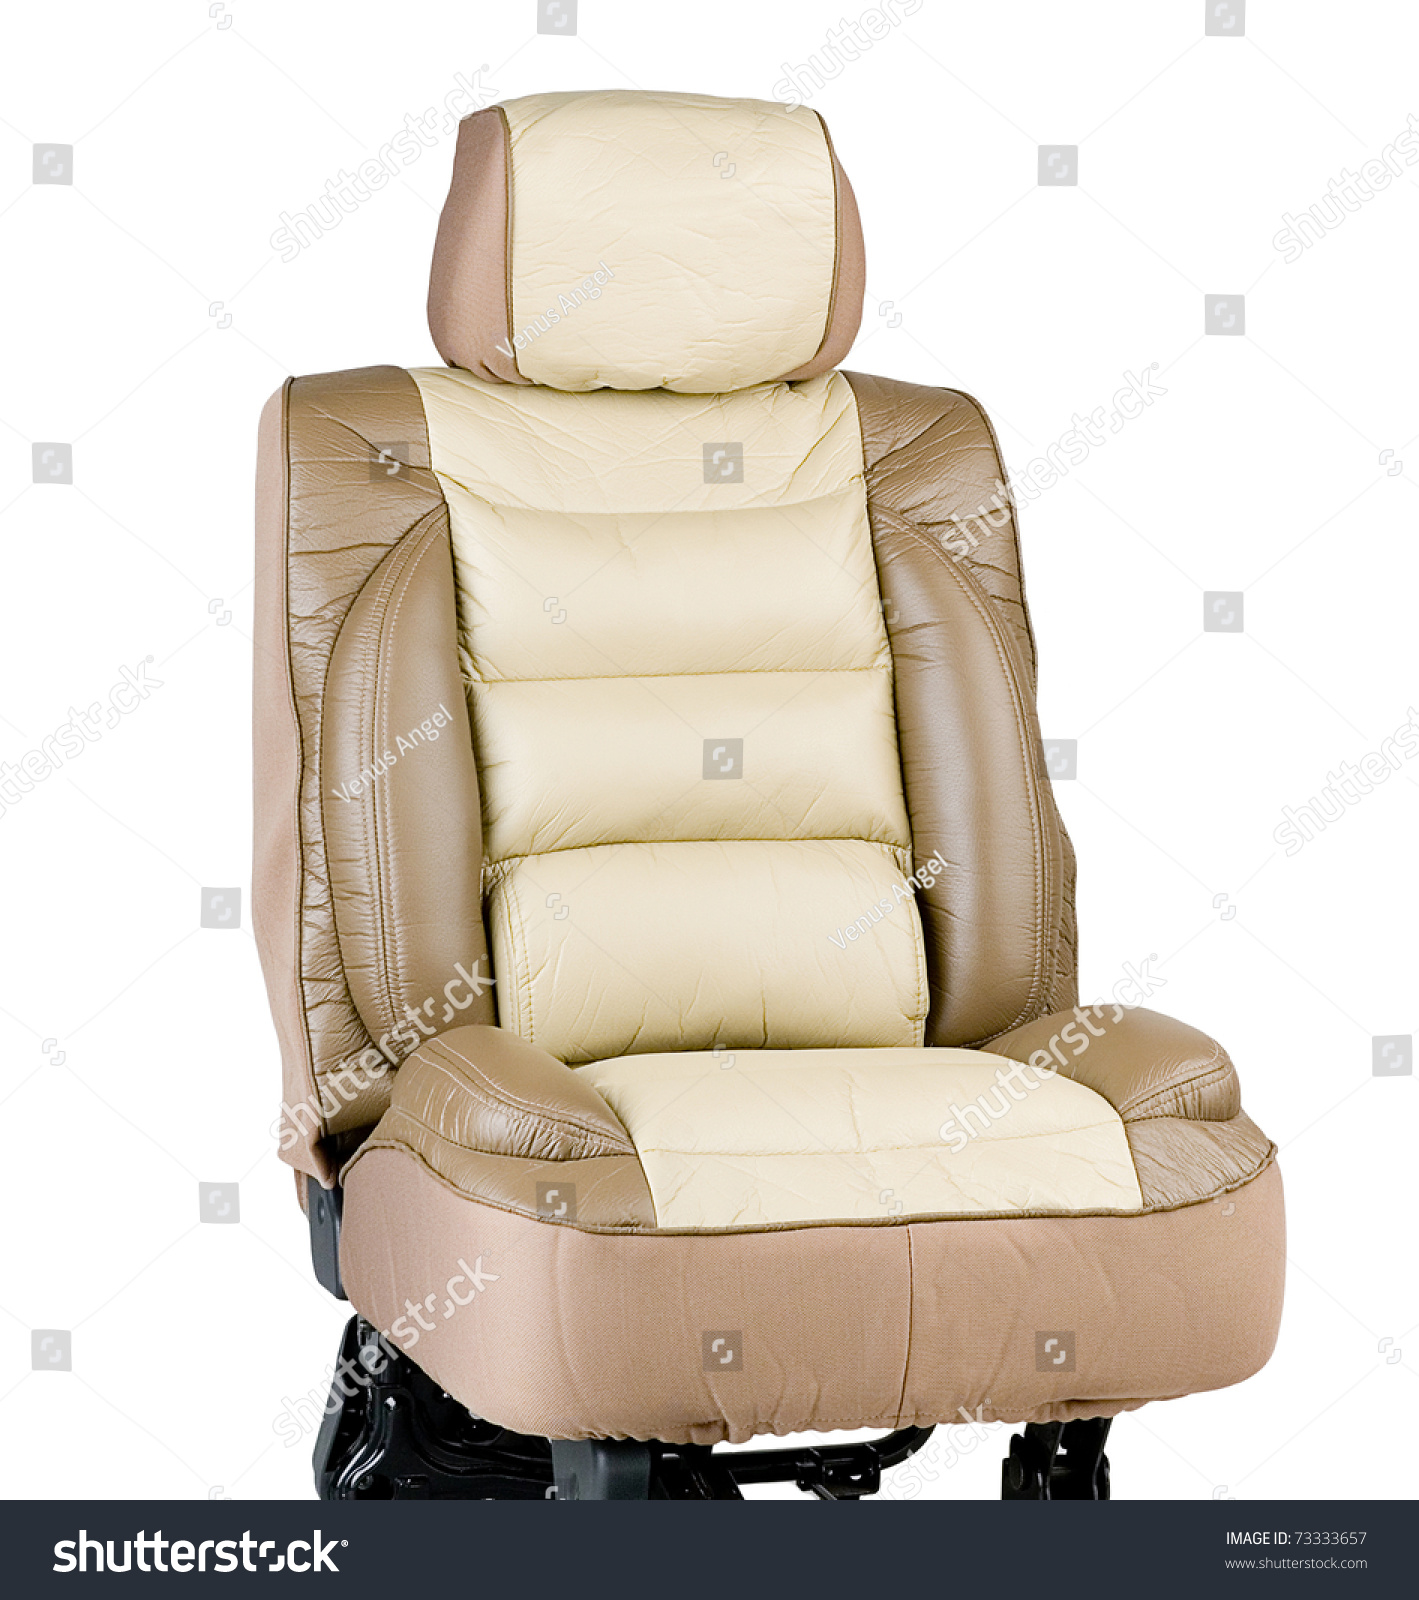 Protect Your Car Seat Dirty Still Stock Photo Edit Now 73333657